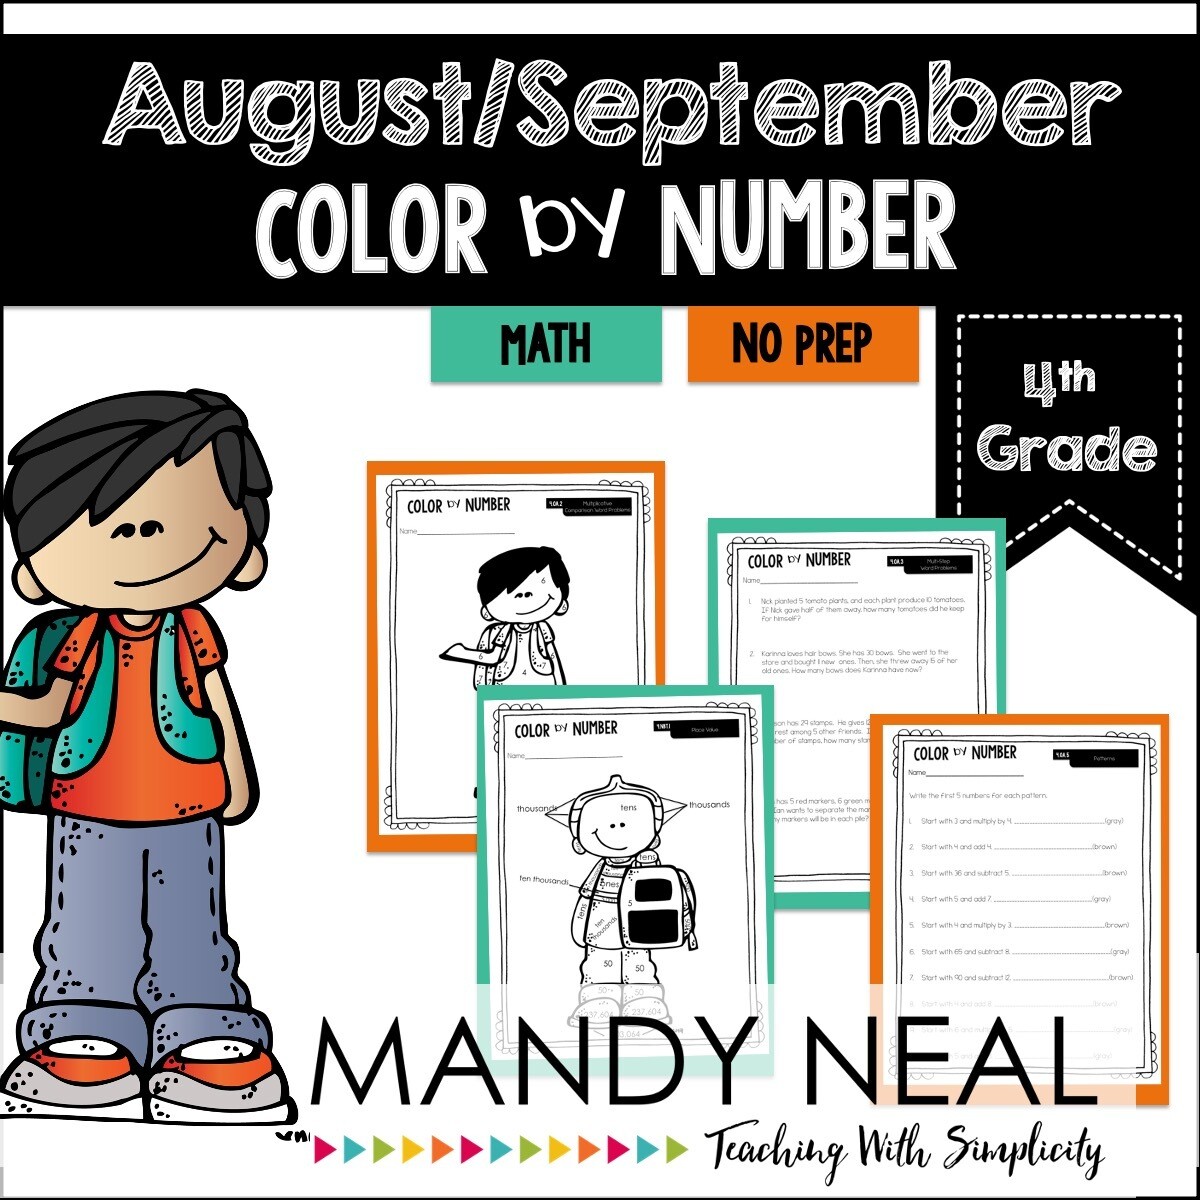 August/ September Color By Number for 4th Grade Math